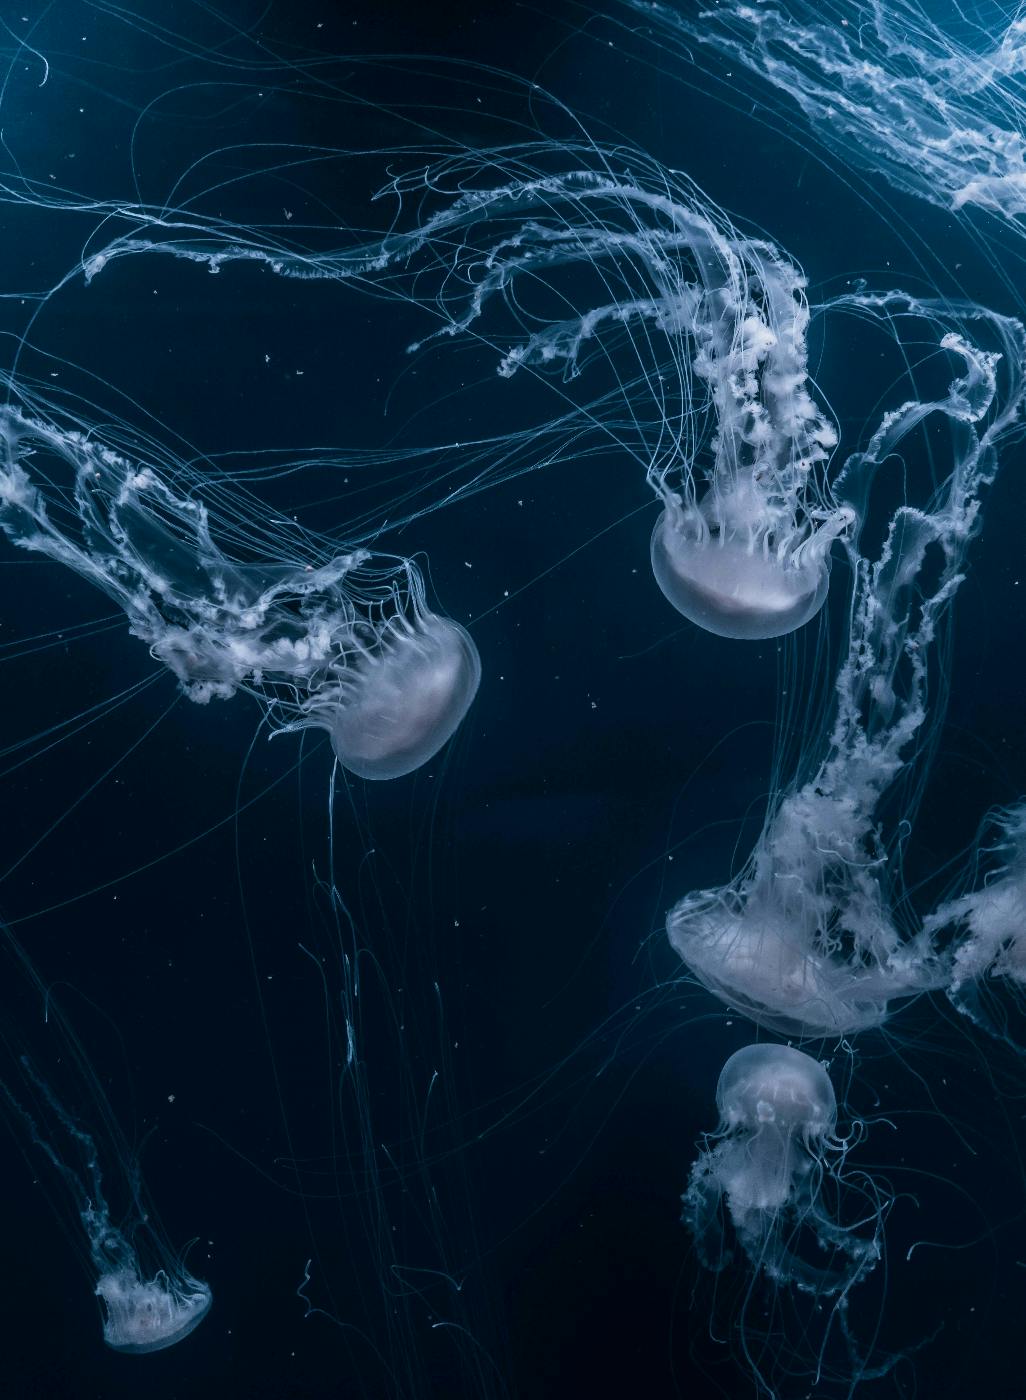 Box Jellyfish floating in the deep